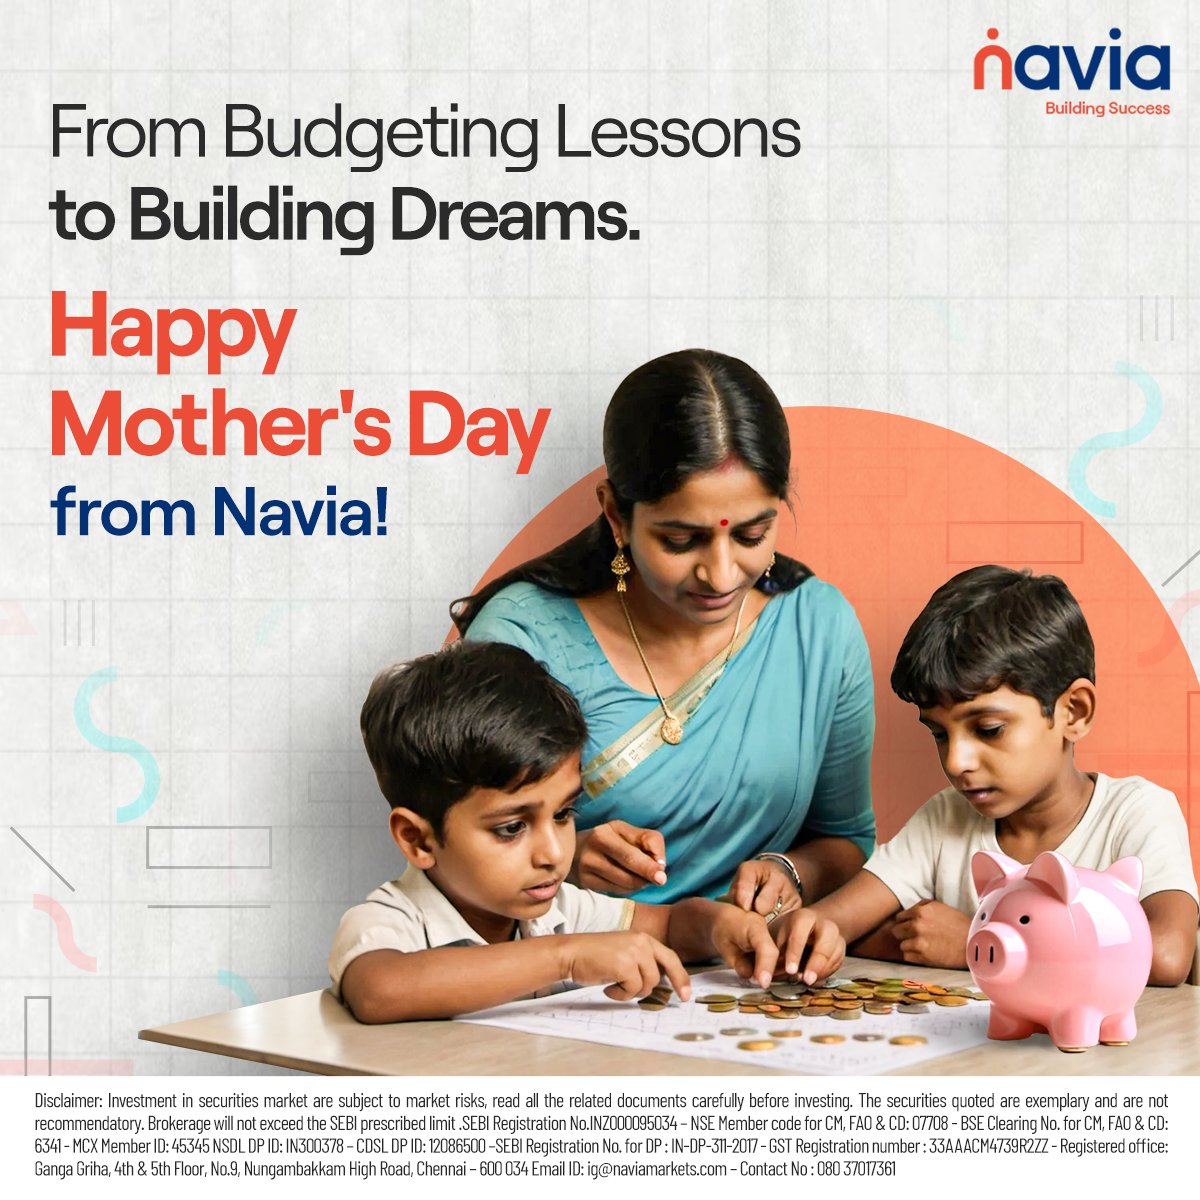 From teaching us to save every penny to cheering us on as we chase our biggest dreams, moms are our financial heroes and biggest supporters. Happy Mother's Day to all the incredible moms out there!

#Navia #TrustedTradingPartner #TradeSmart #FinancialFreedom #InvestingJourney